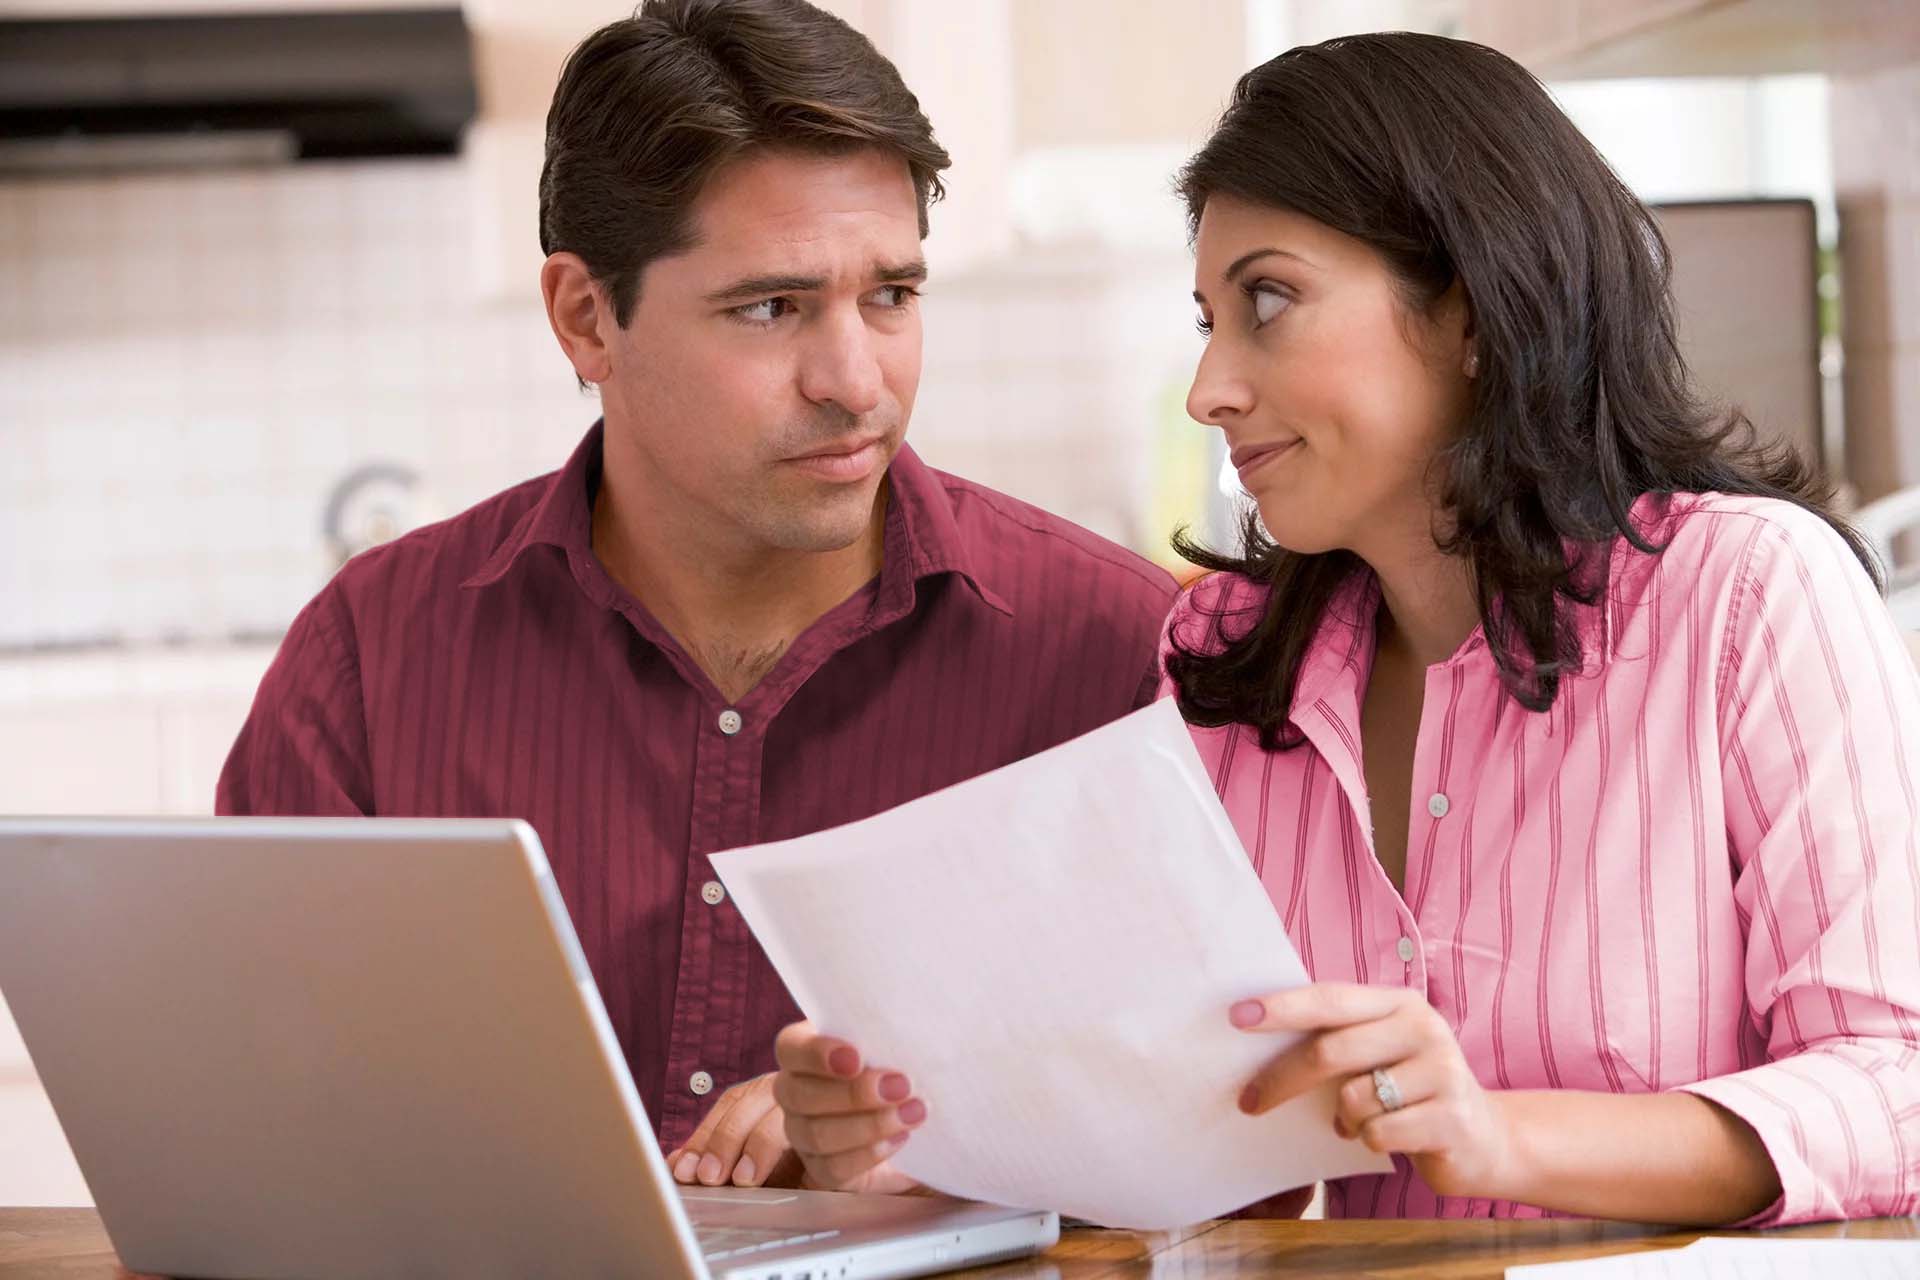 Man and woman looking at each other in front of laptop